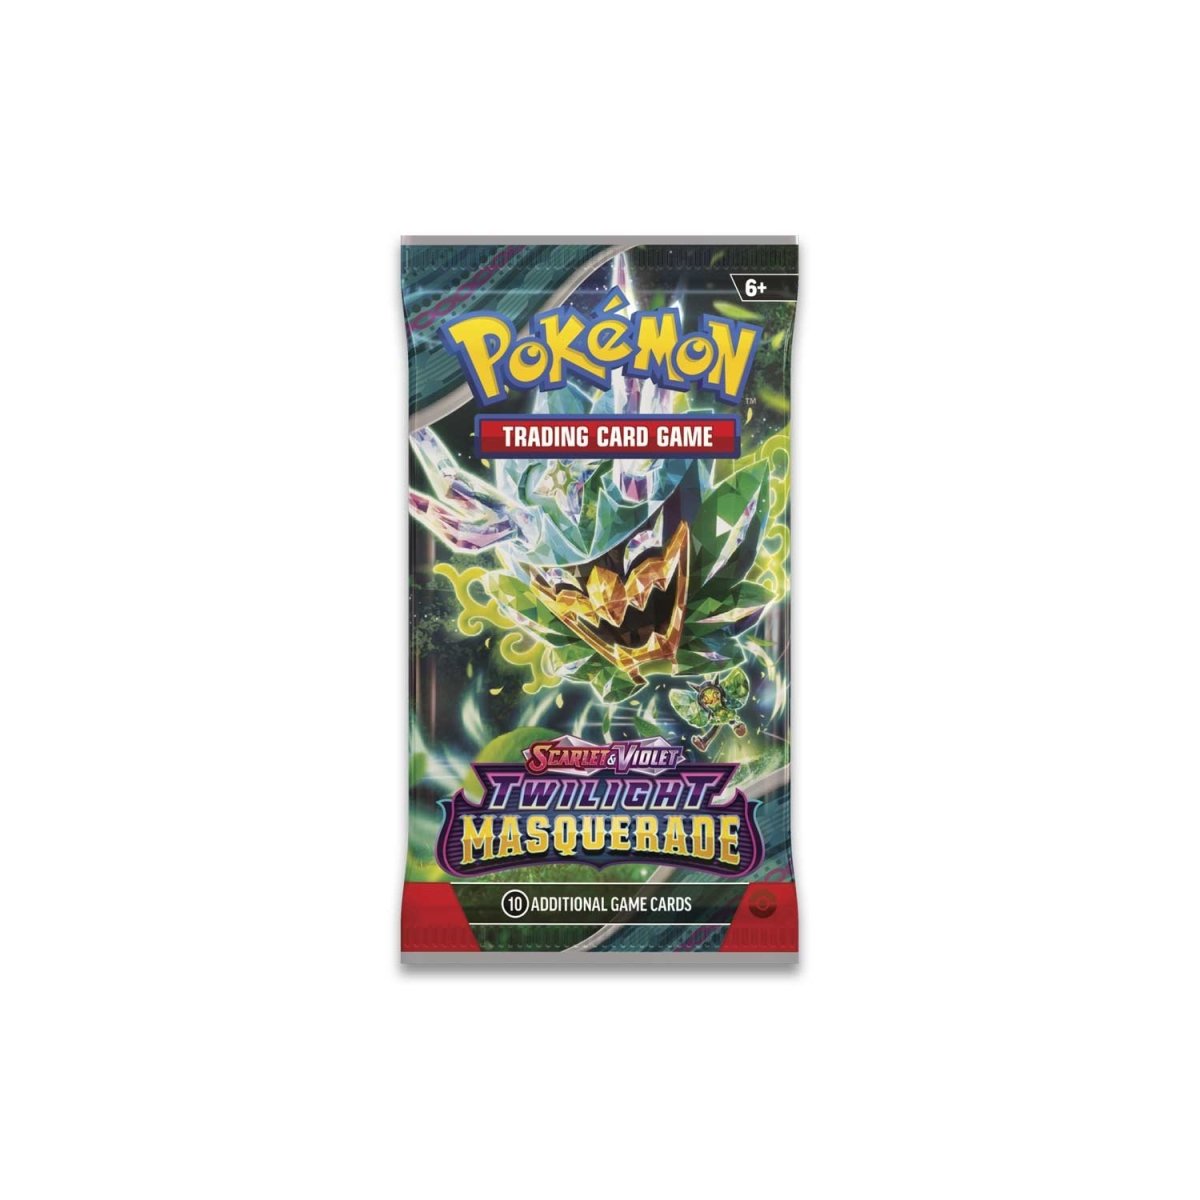 Twilight Masquerade Booster Pack